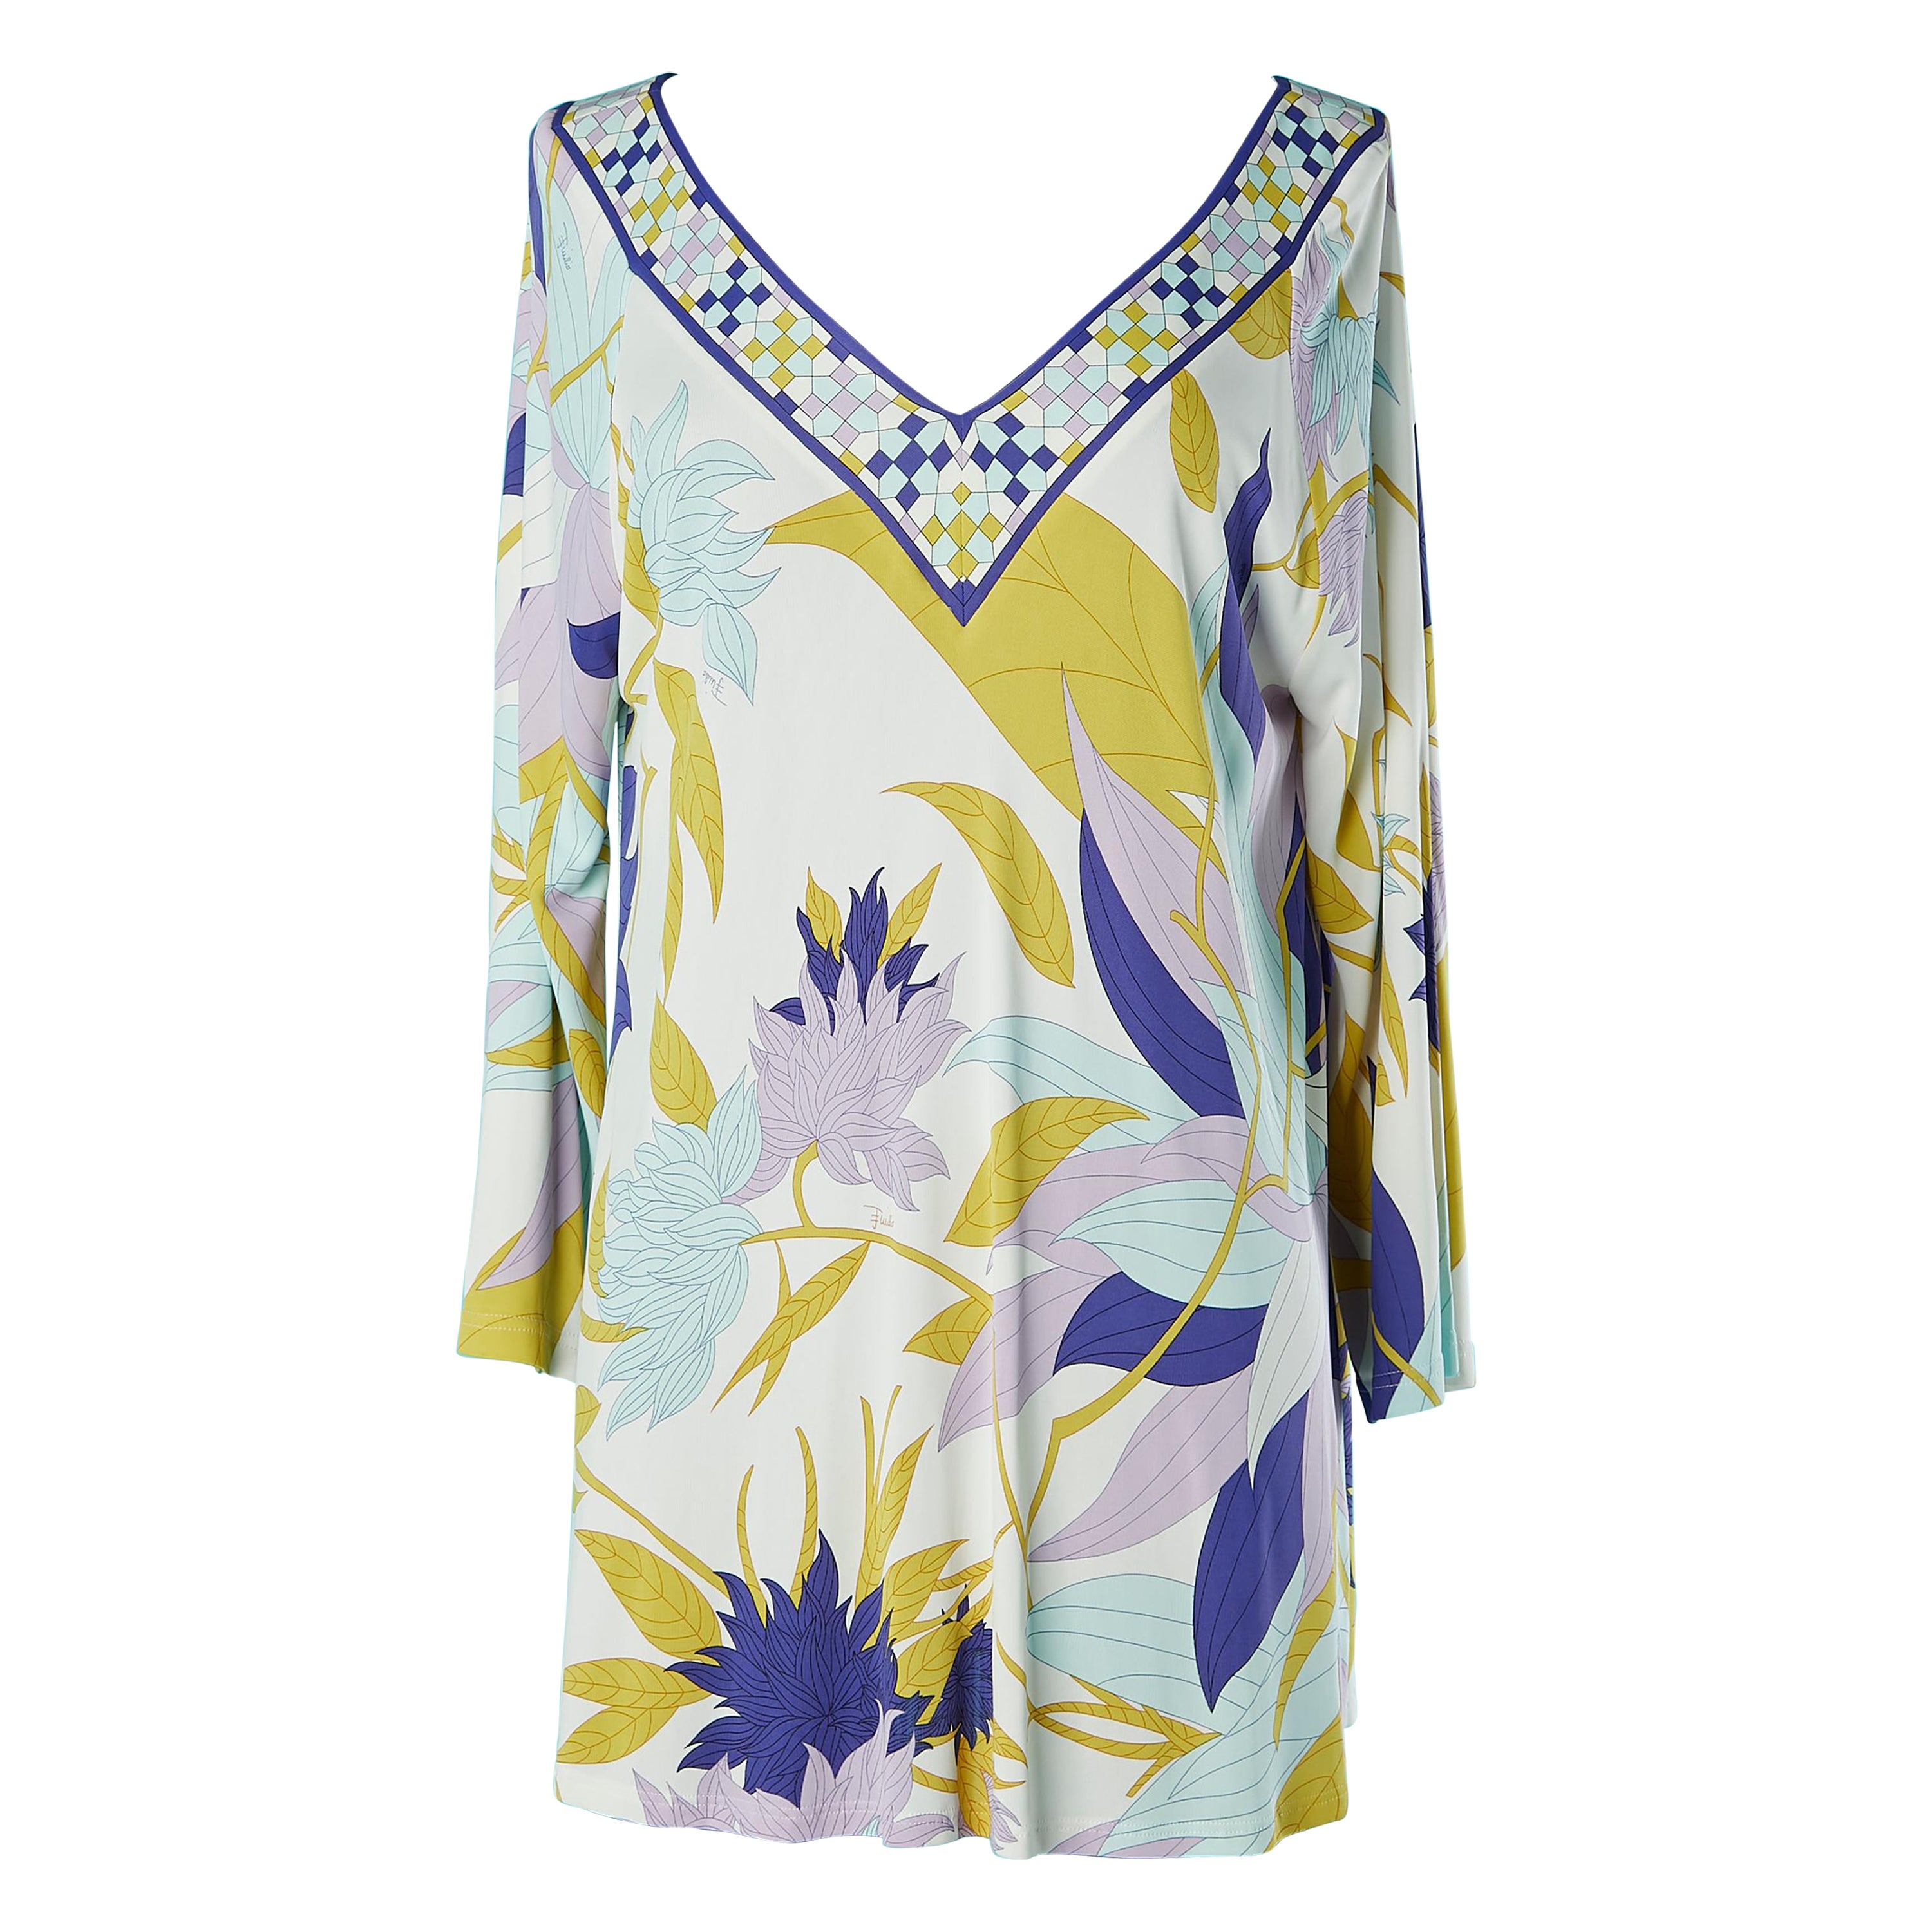 Printed tunic in rayon jersey Emilio Pucci  For Sale